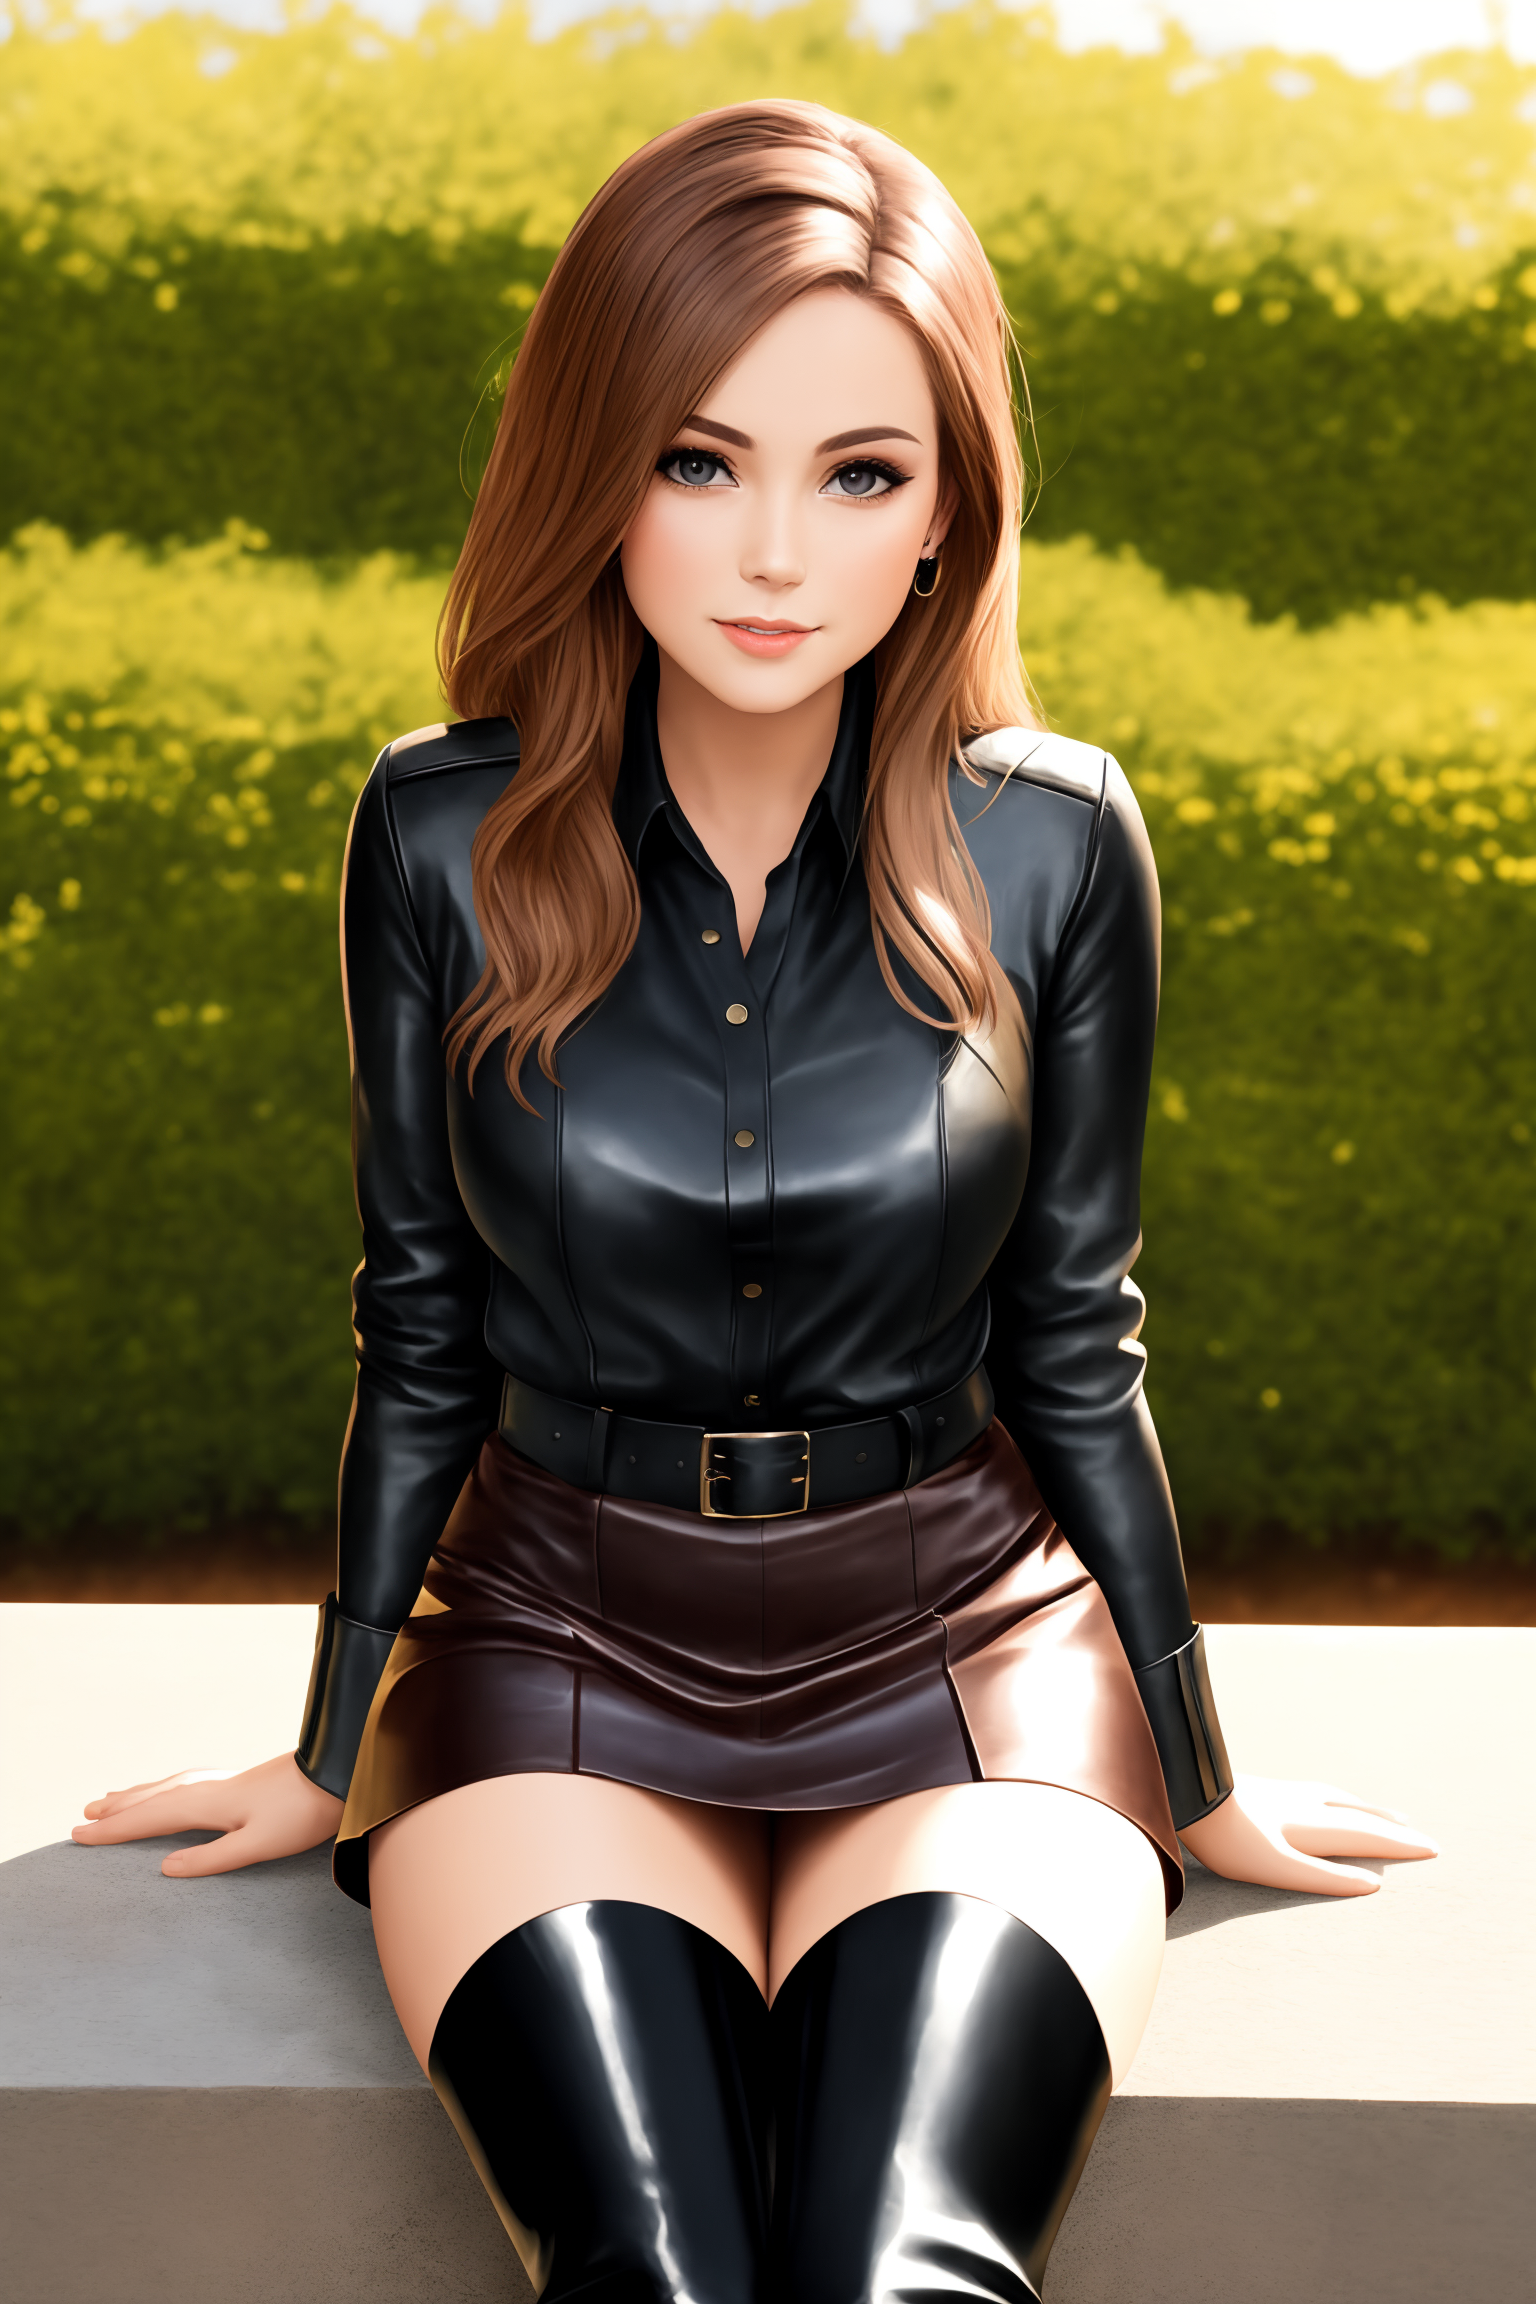 General 1536x2304 AI art Stable Diffusion portrait display looking at viewer leather boots leather skirts leather jacket smiling sitting women long hair brunette